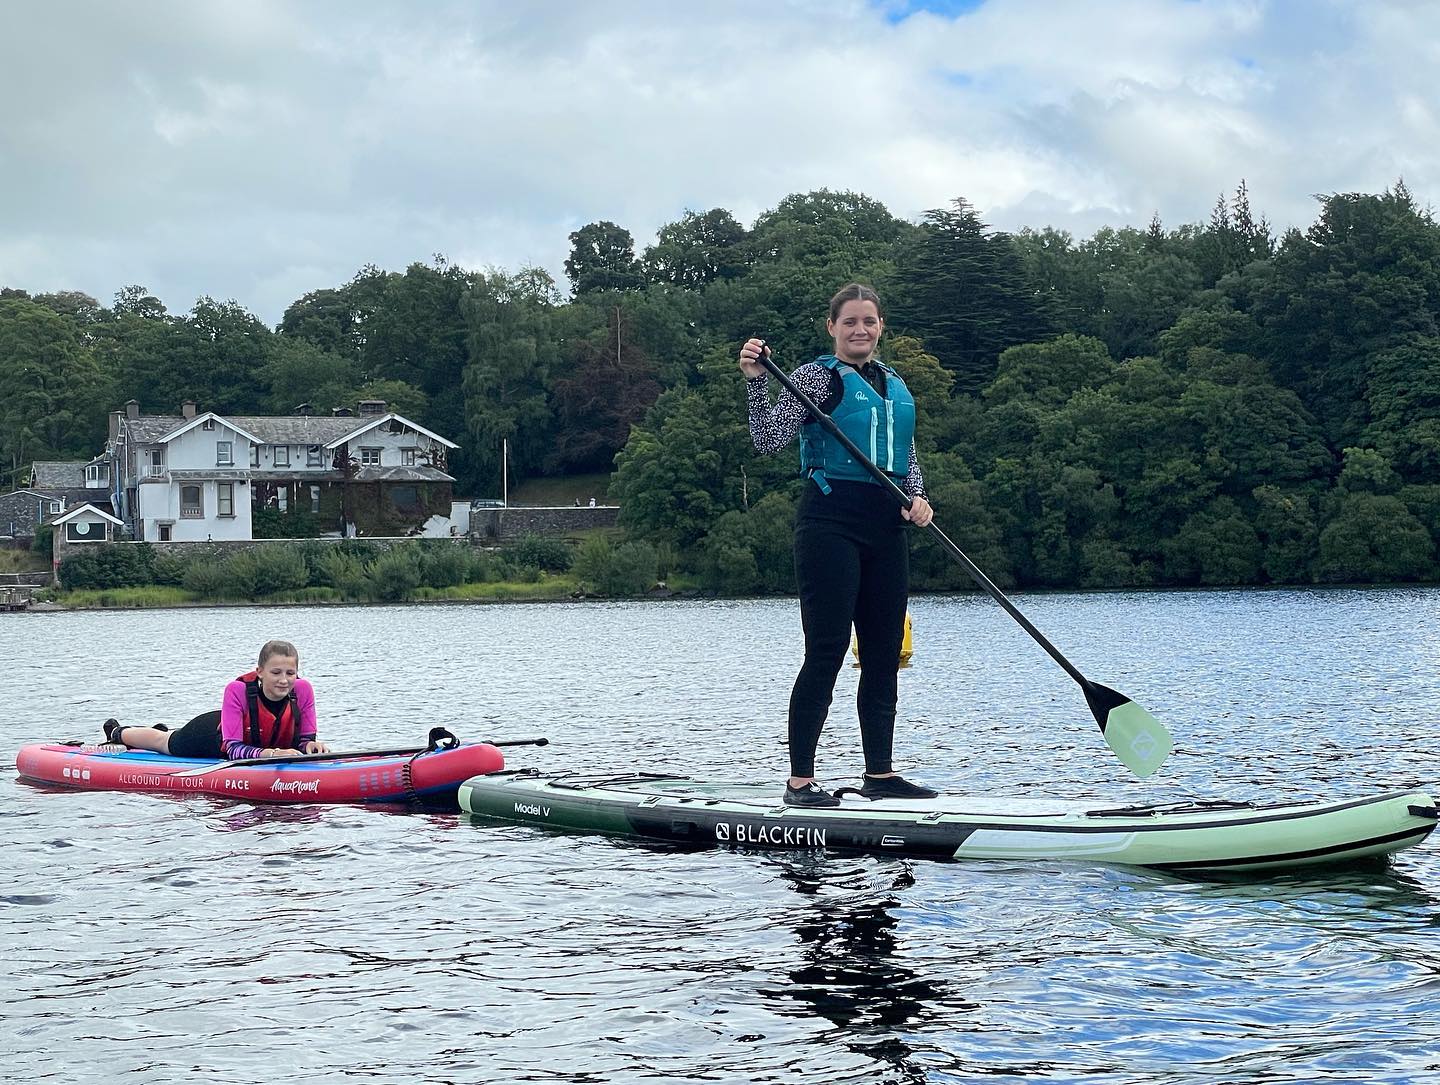 Great day on the water 🚣‍♀️ #ullswater